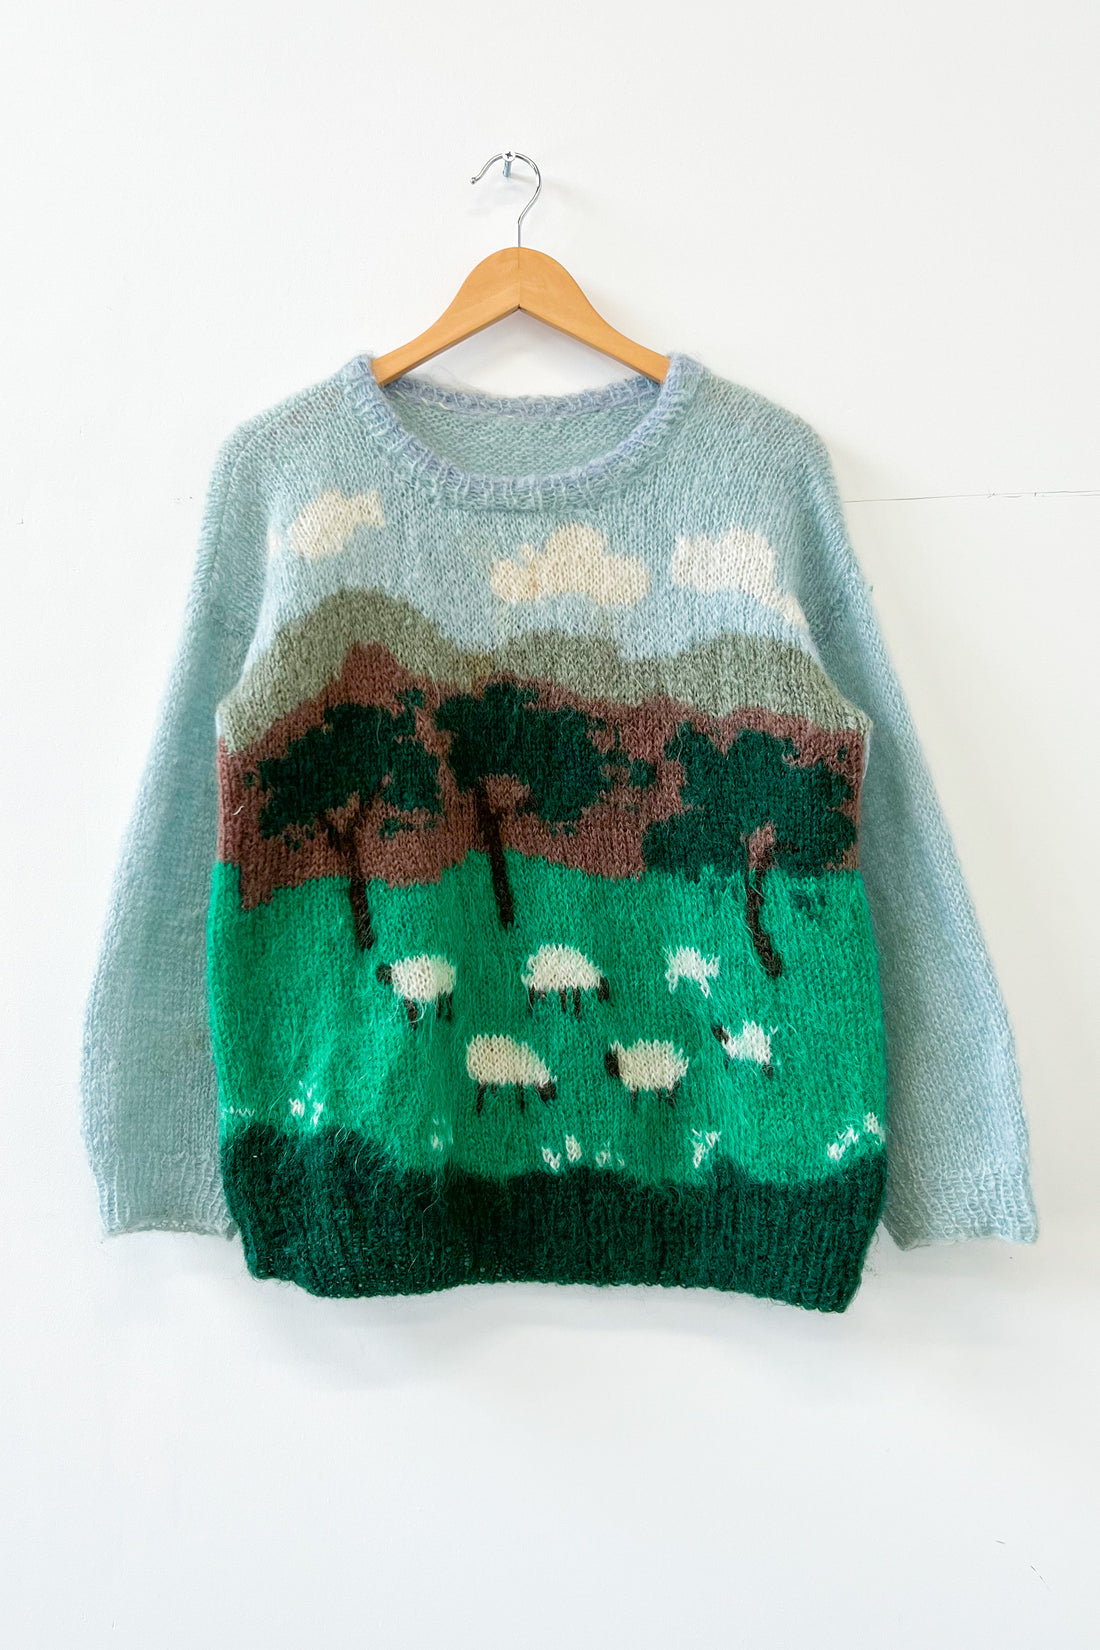 Vintage Scenic Hand Knitted Mohair Jumper